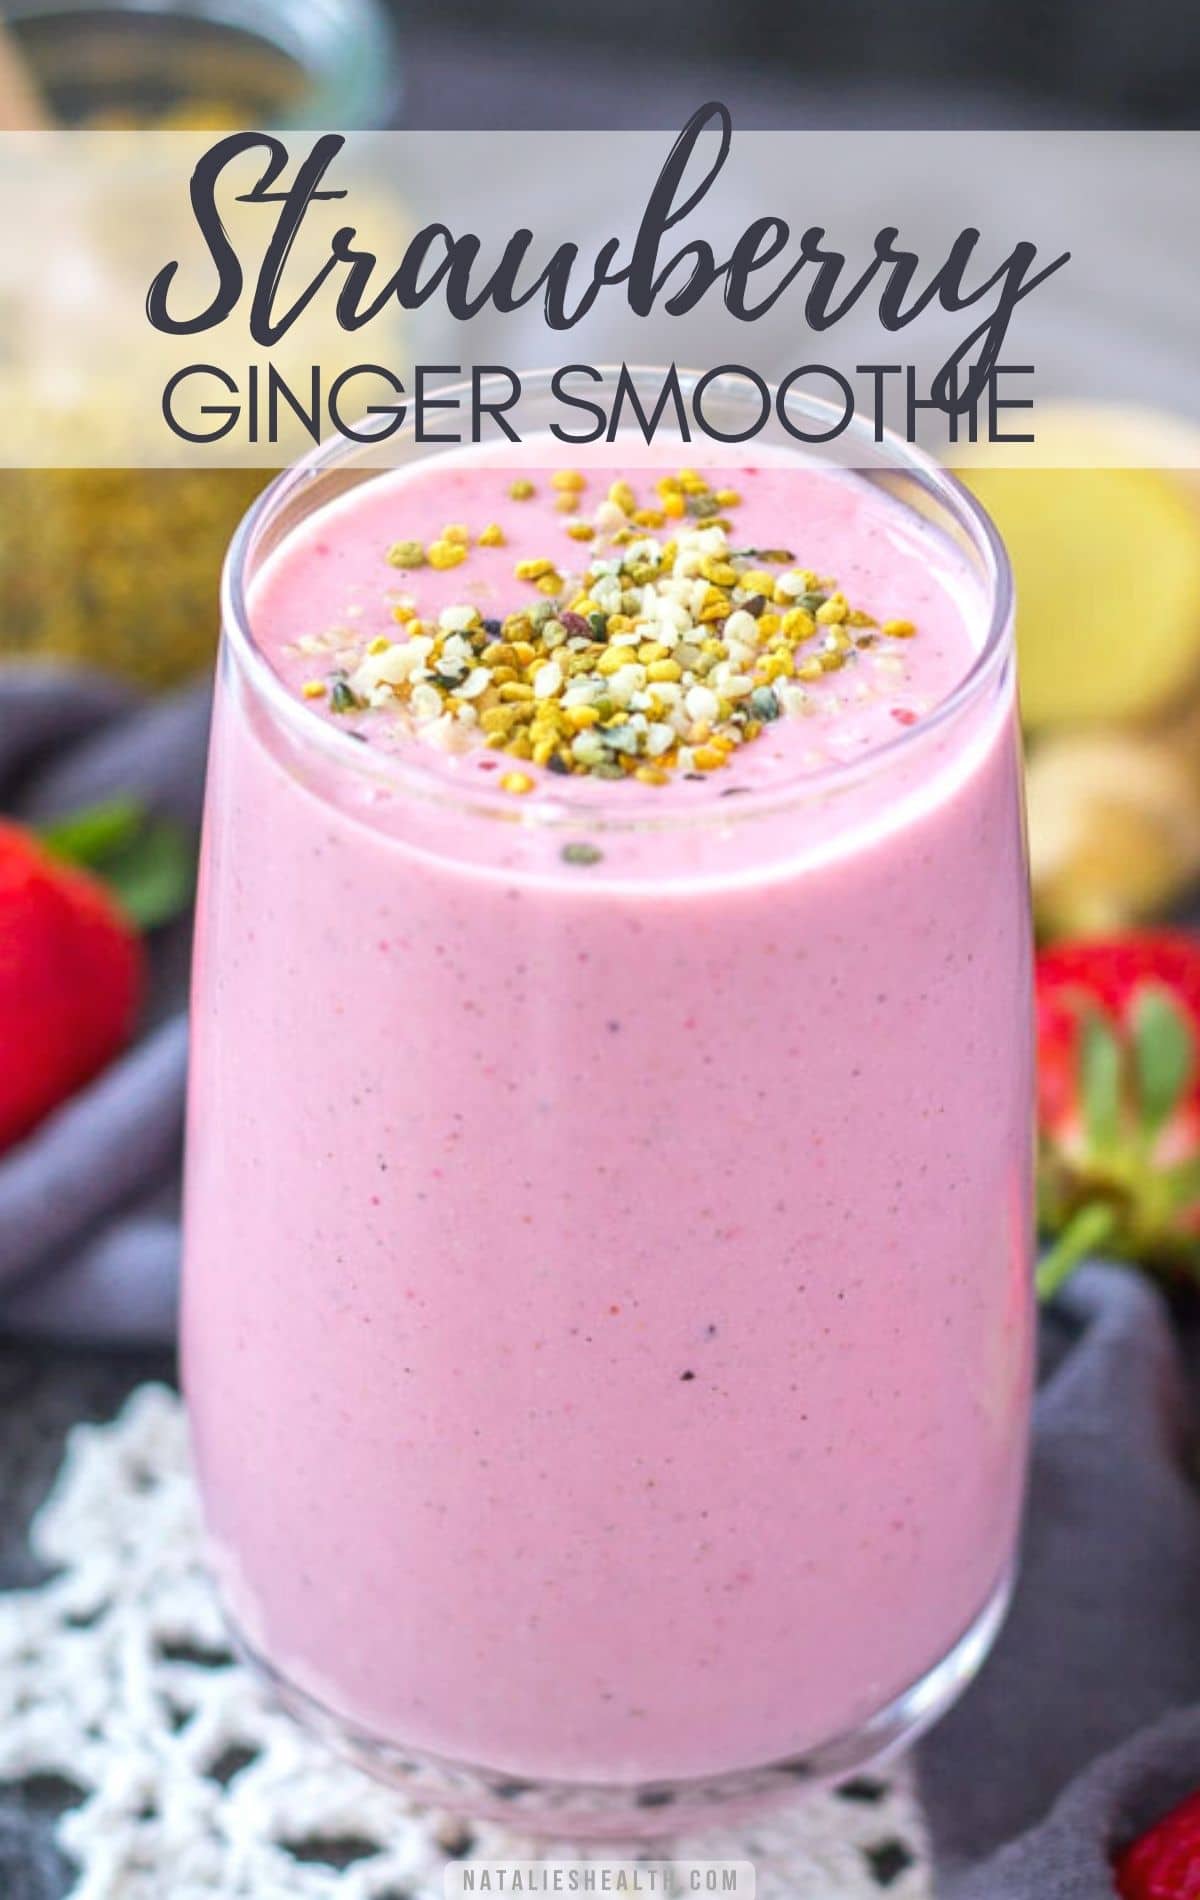 Strawberry Ginger Smoothie PIN